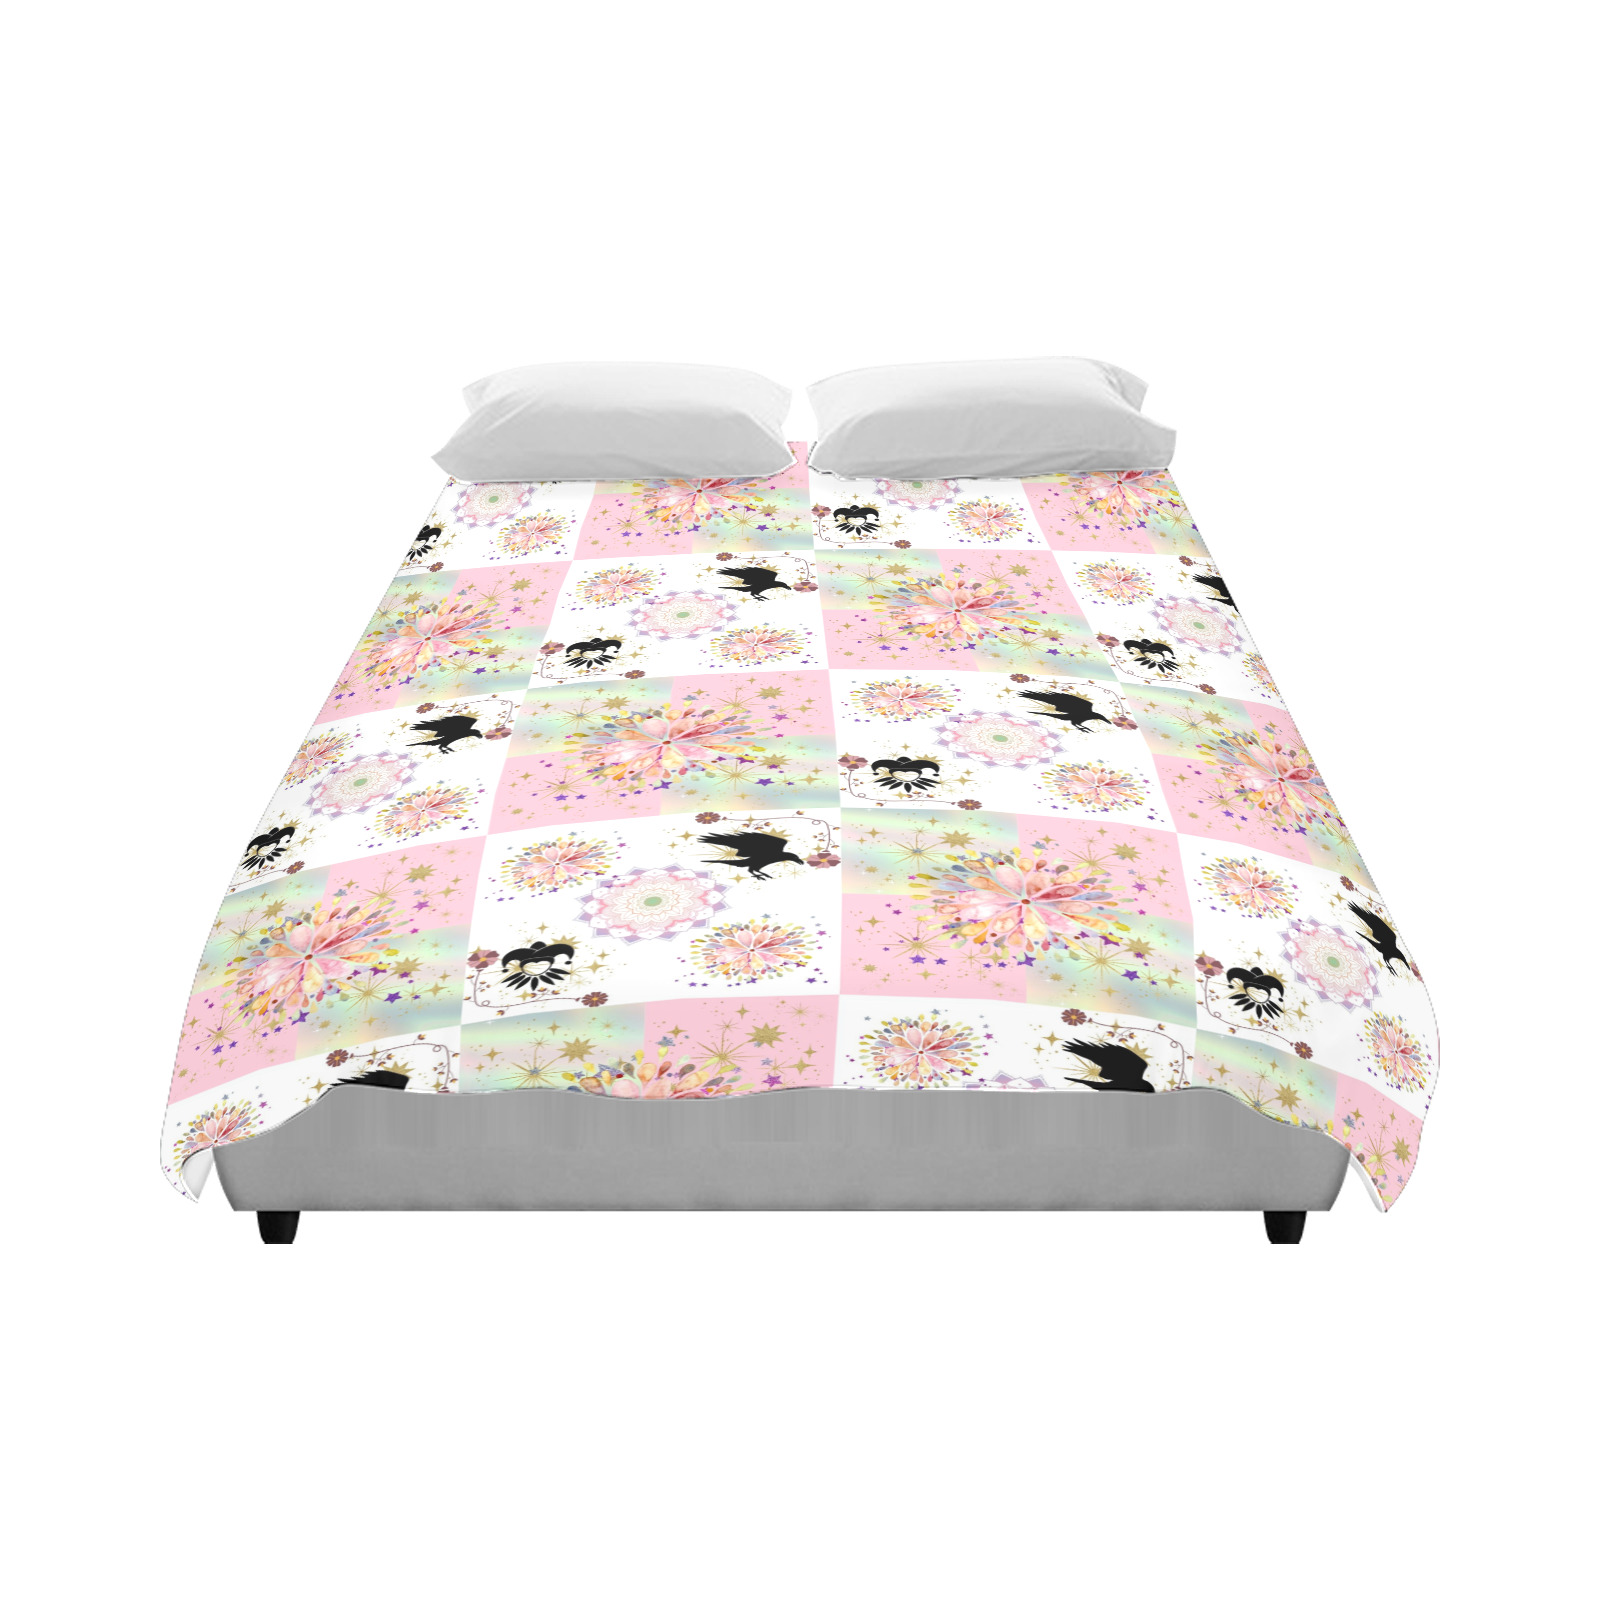 Secret Garden With Harlequin and Crow Patch Artwork Duvet Cover 86"x70" ( All-over-print)